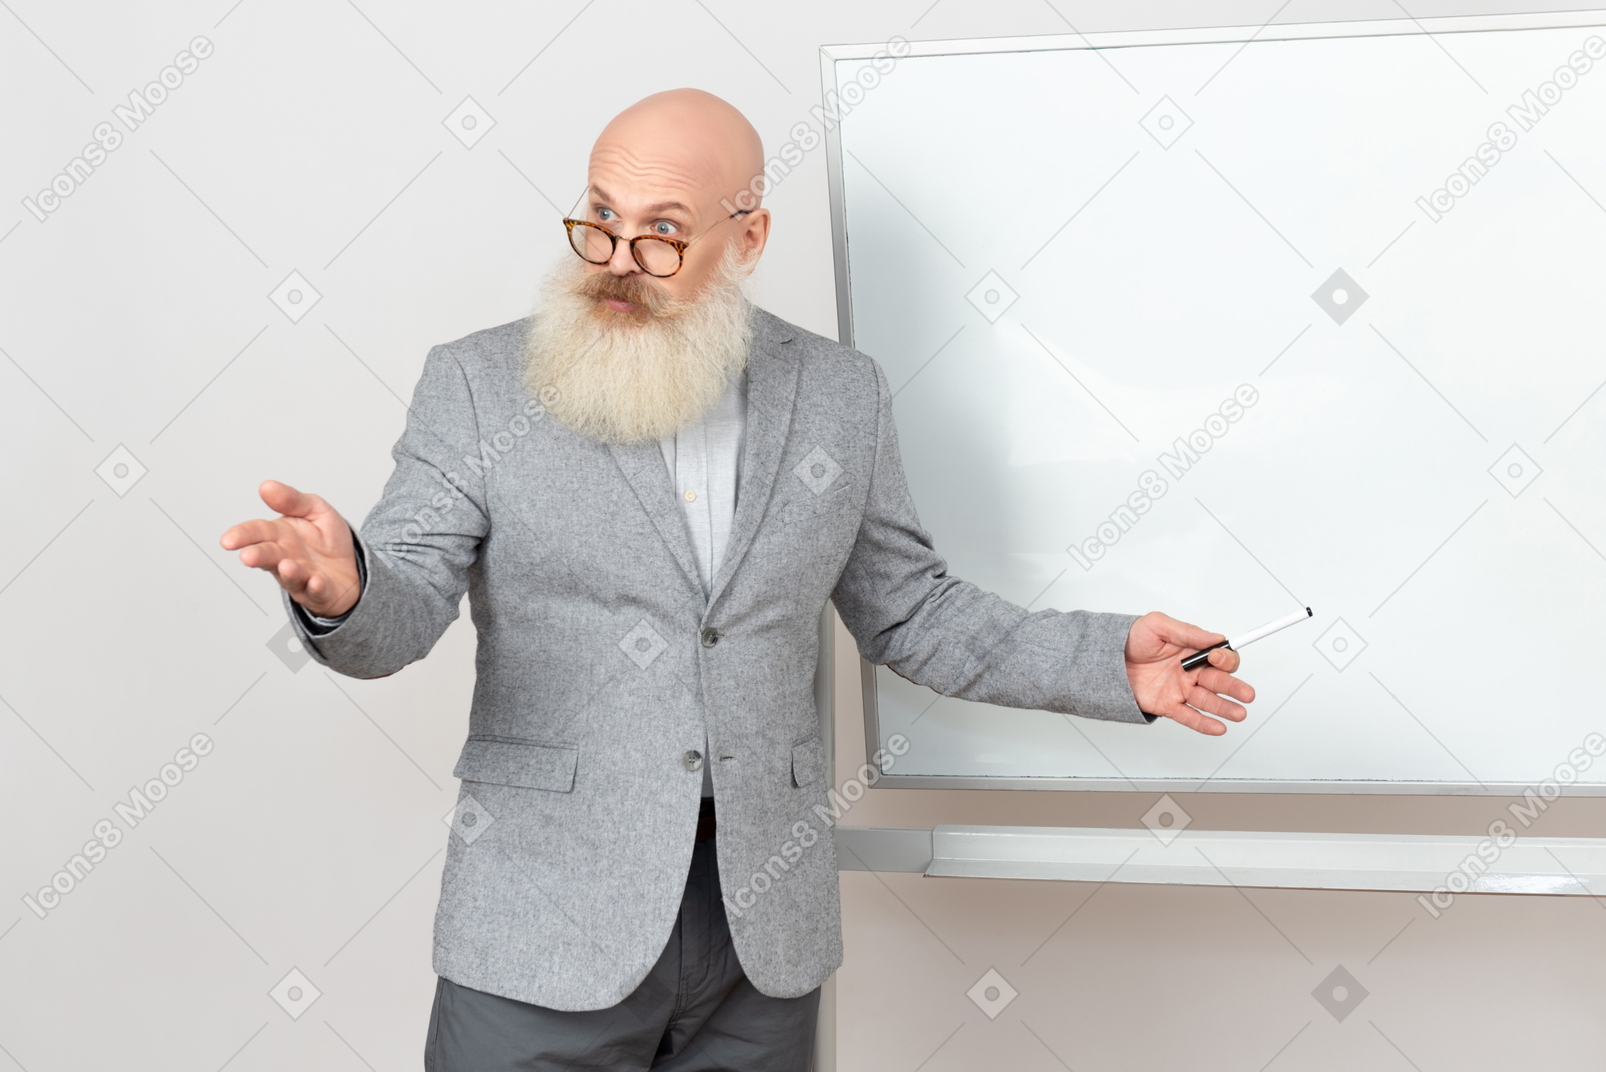 Surprised old professor standing next to whiteboard and explaining something